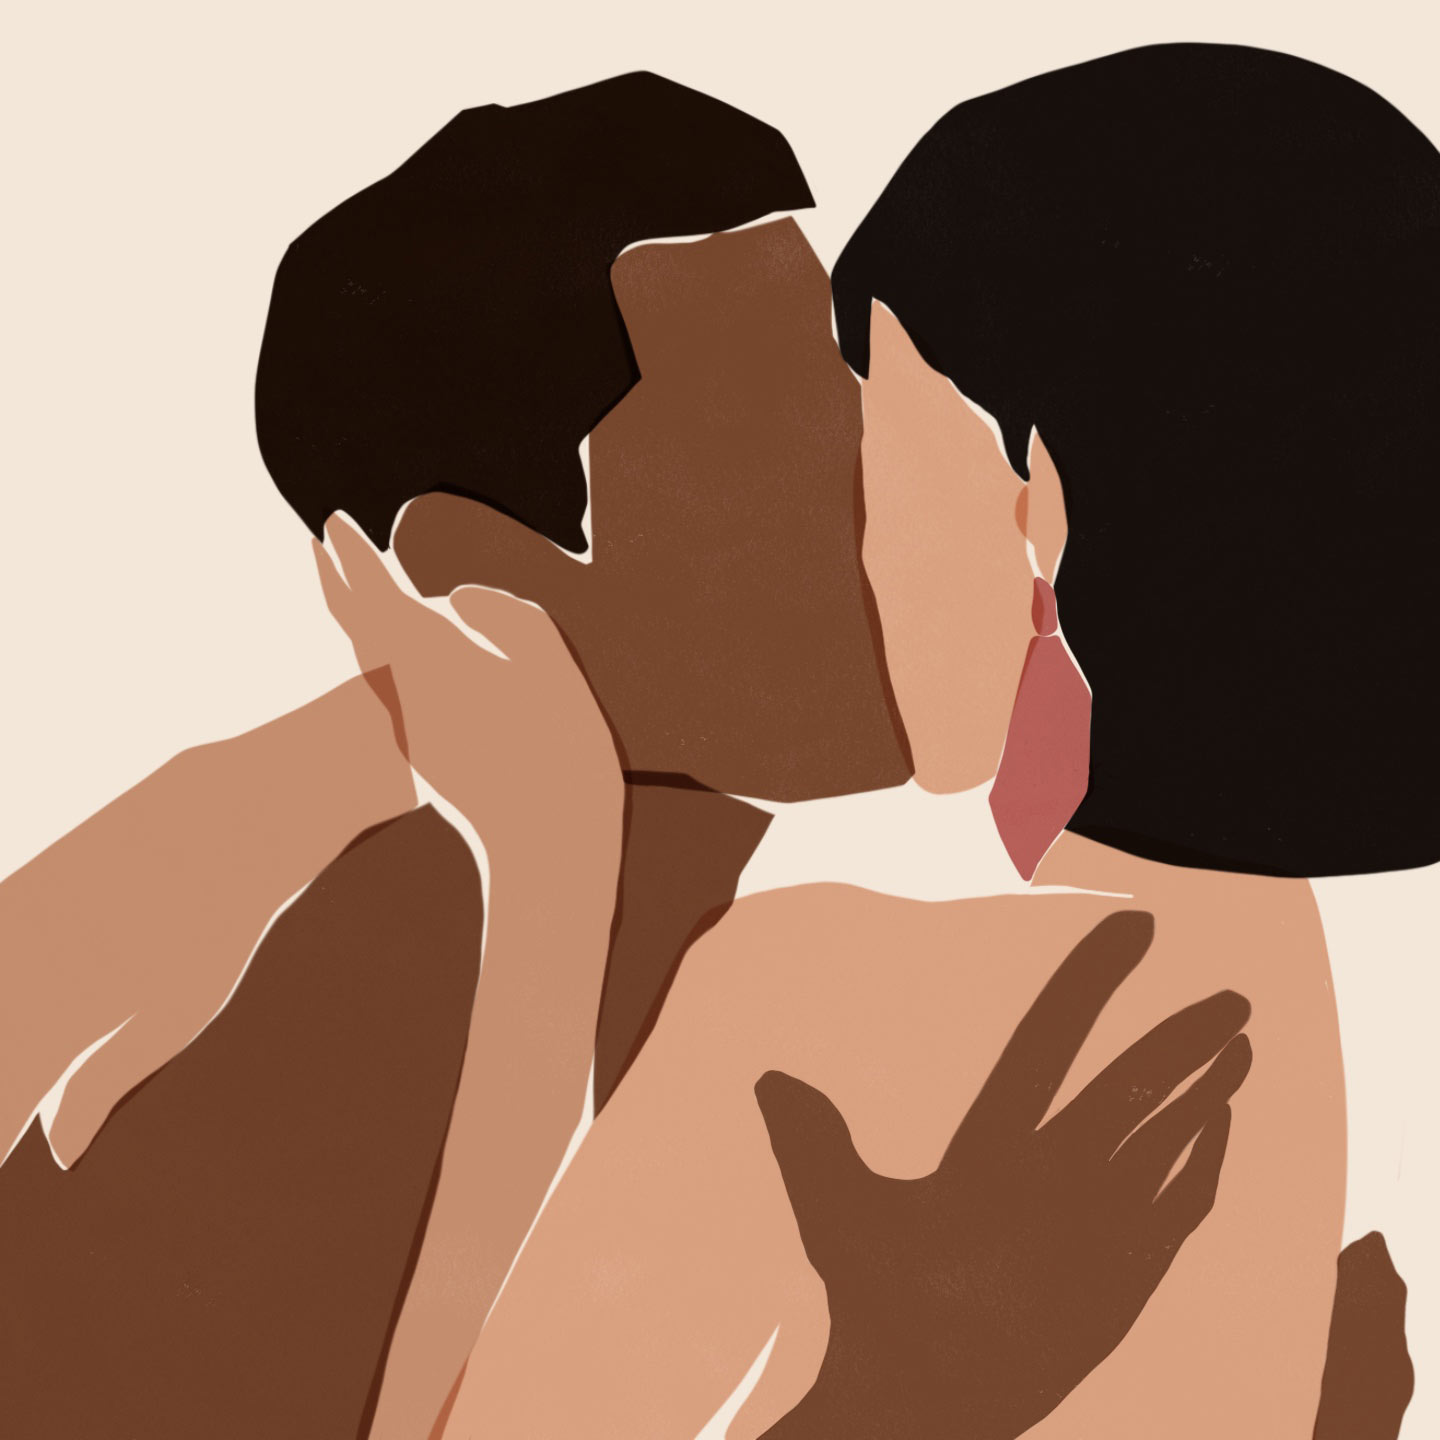 Can Casual Sex Turn Into a Serious Relationship?